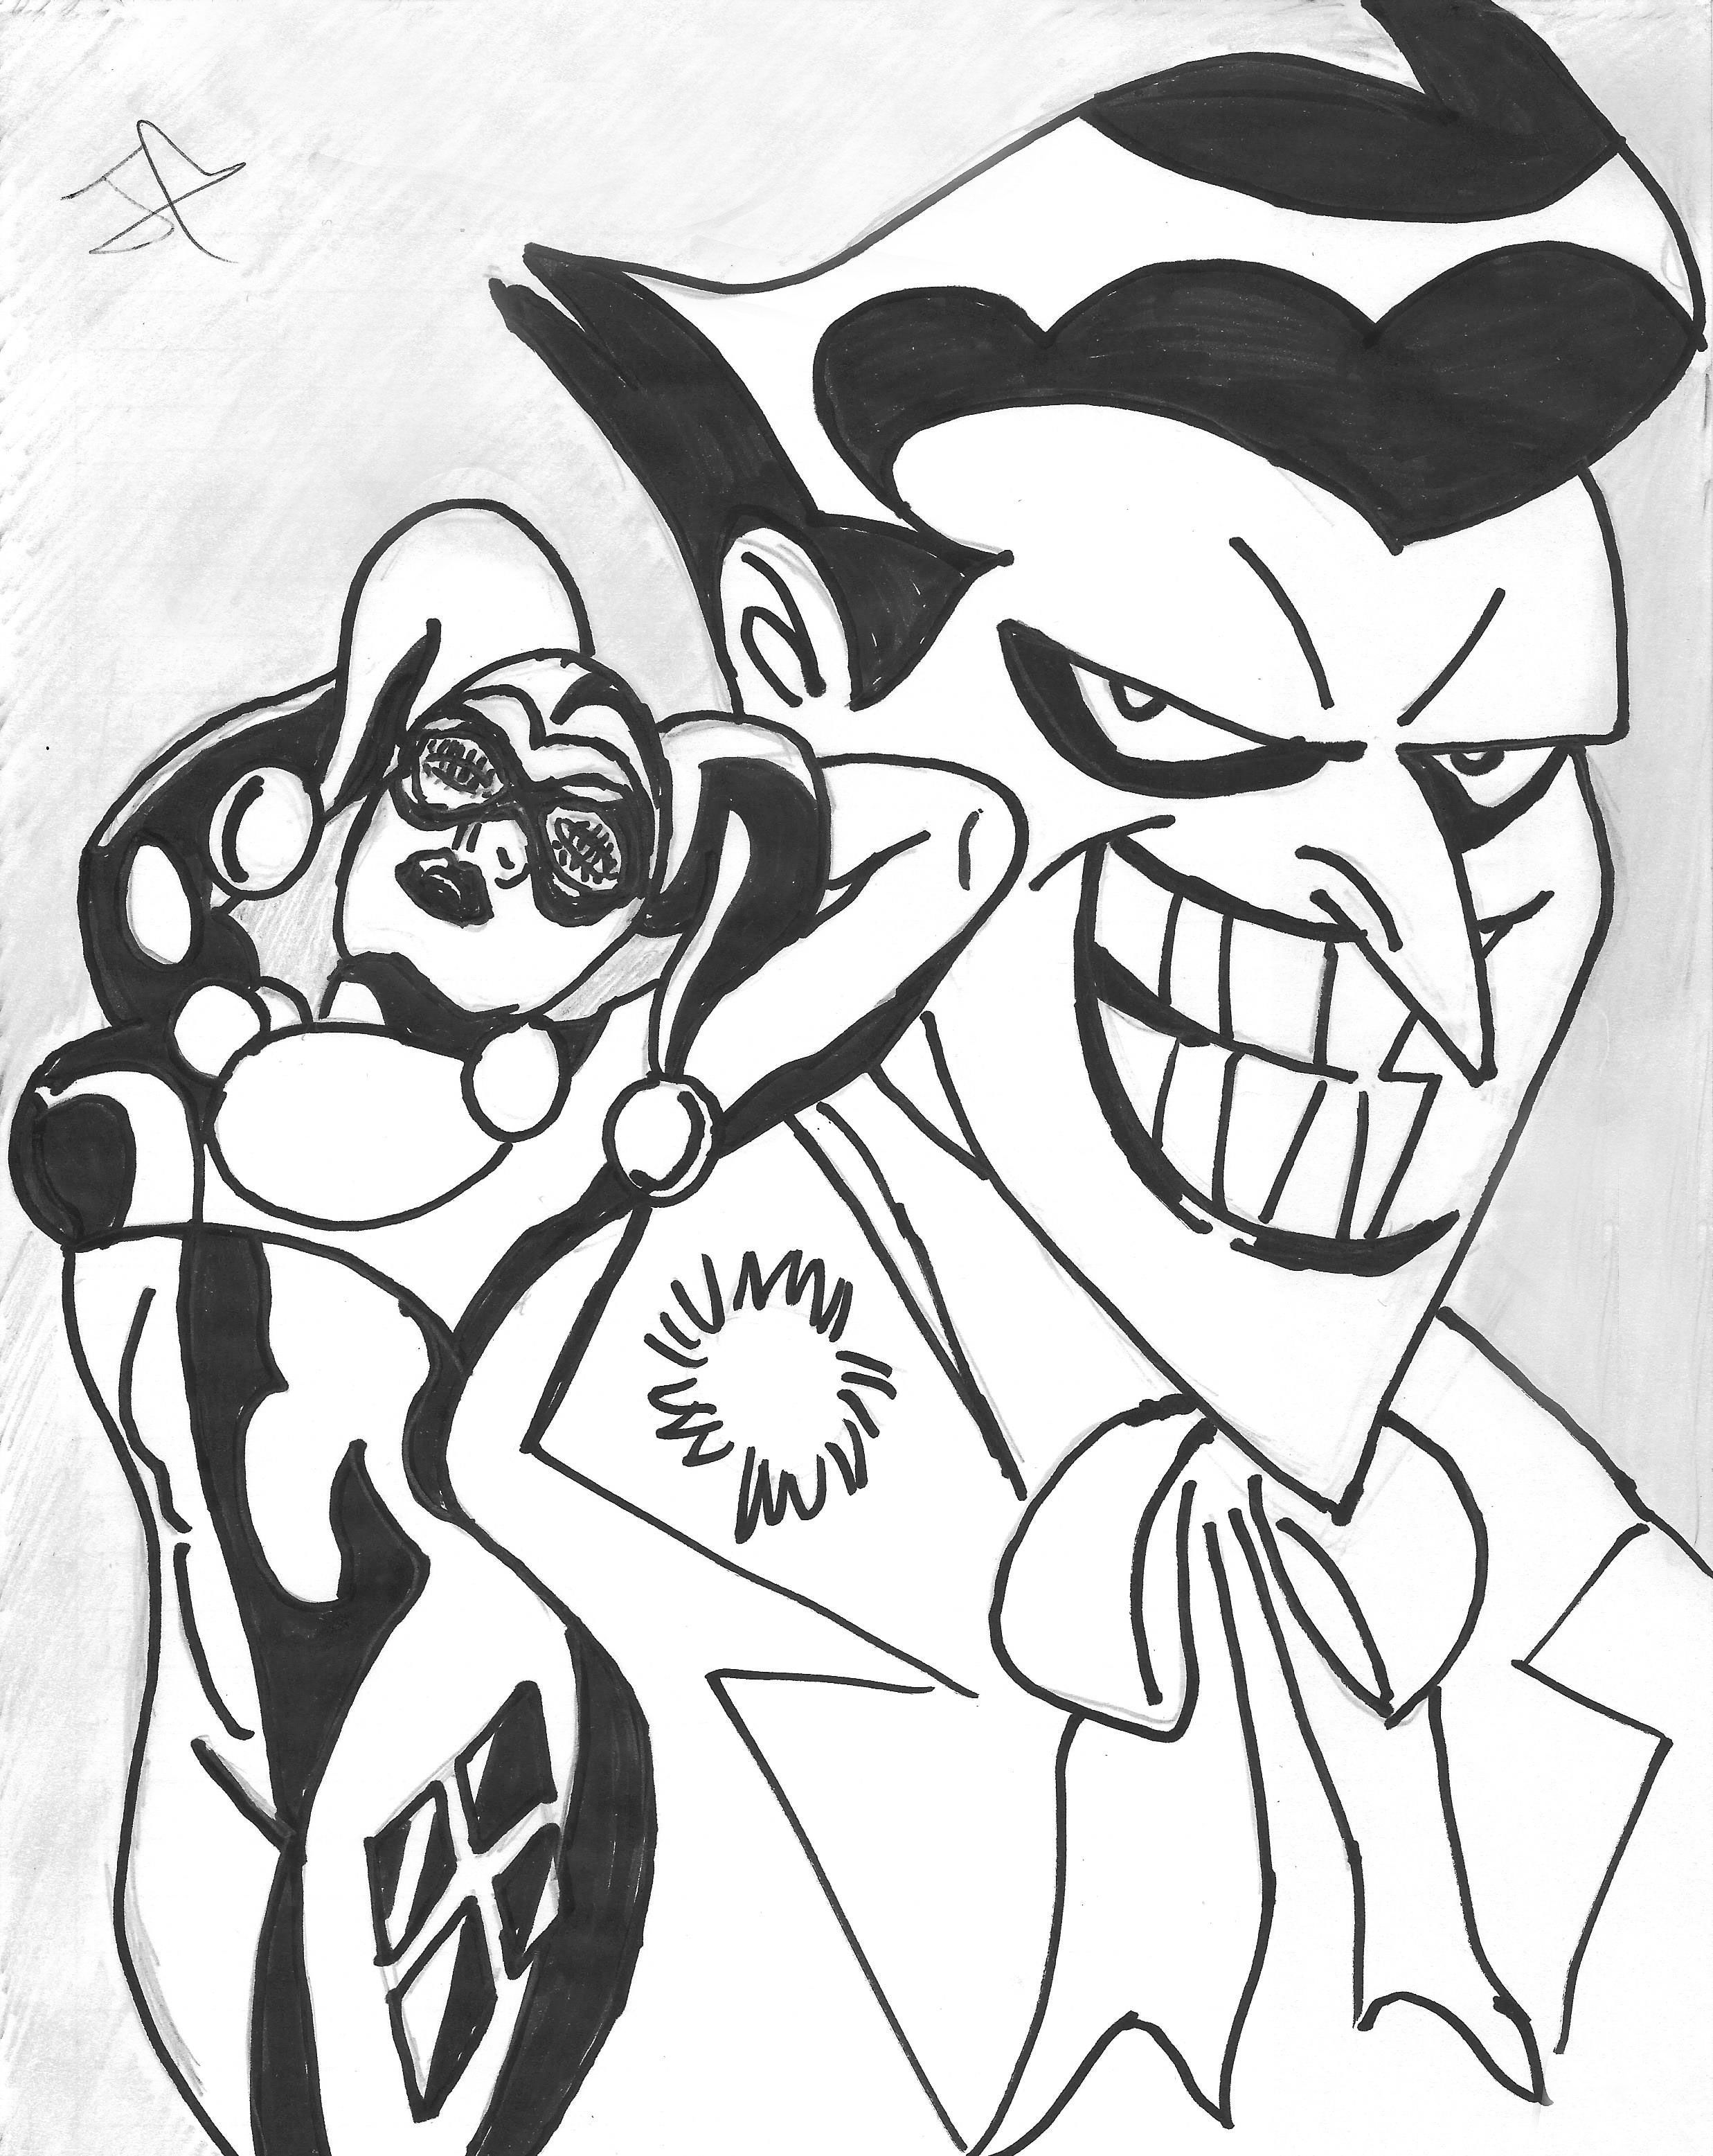 biff meister recommends the joker and harley quinn drawing pic